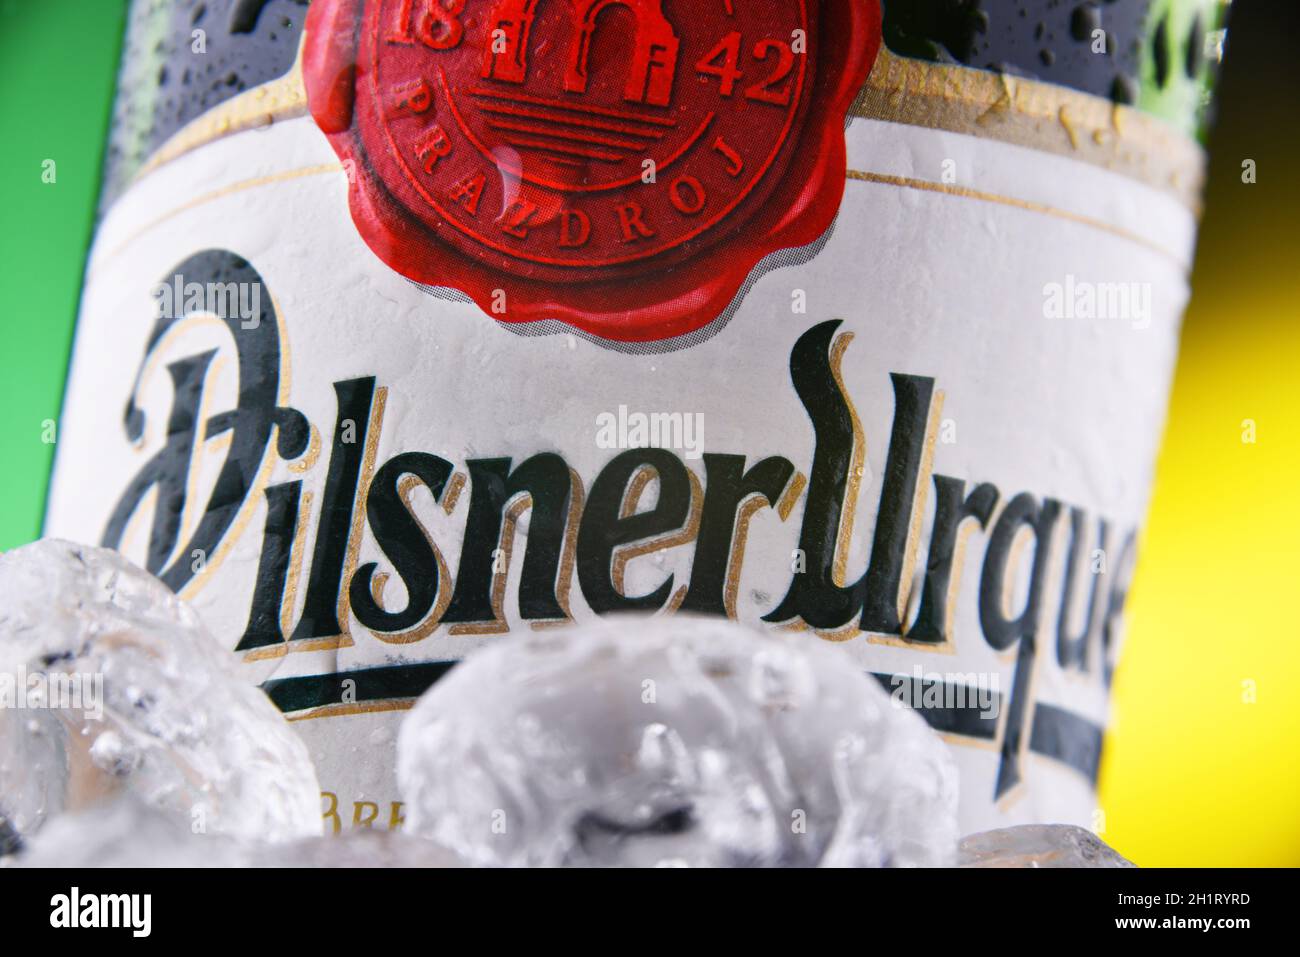 POZNAN, POL - FEB 18, 2021: Bottle of Plzensky Prazdroj, the first pilsner beer in the world, known better by its German name Pilsner Urquell Stock Photo